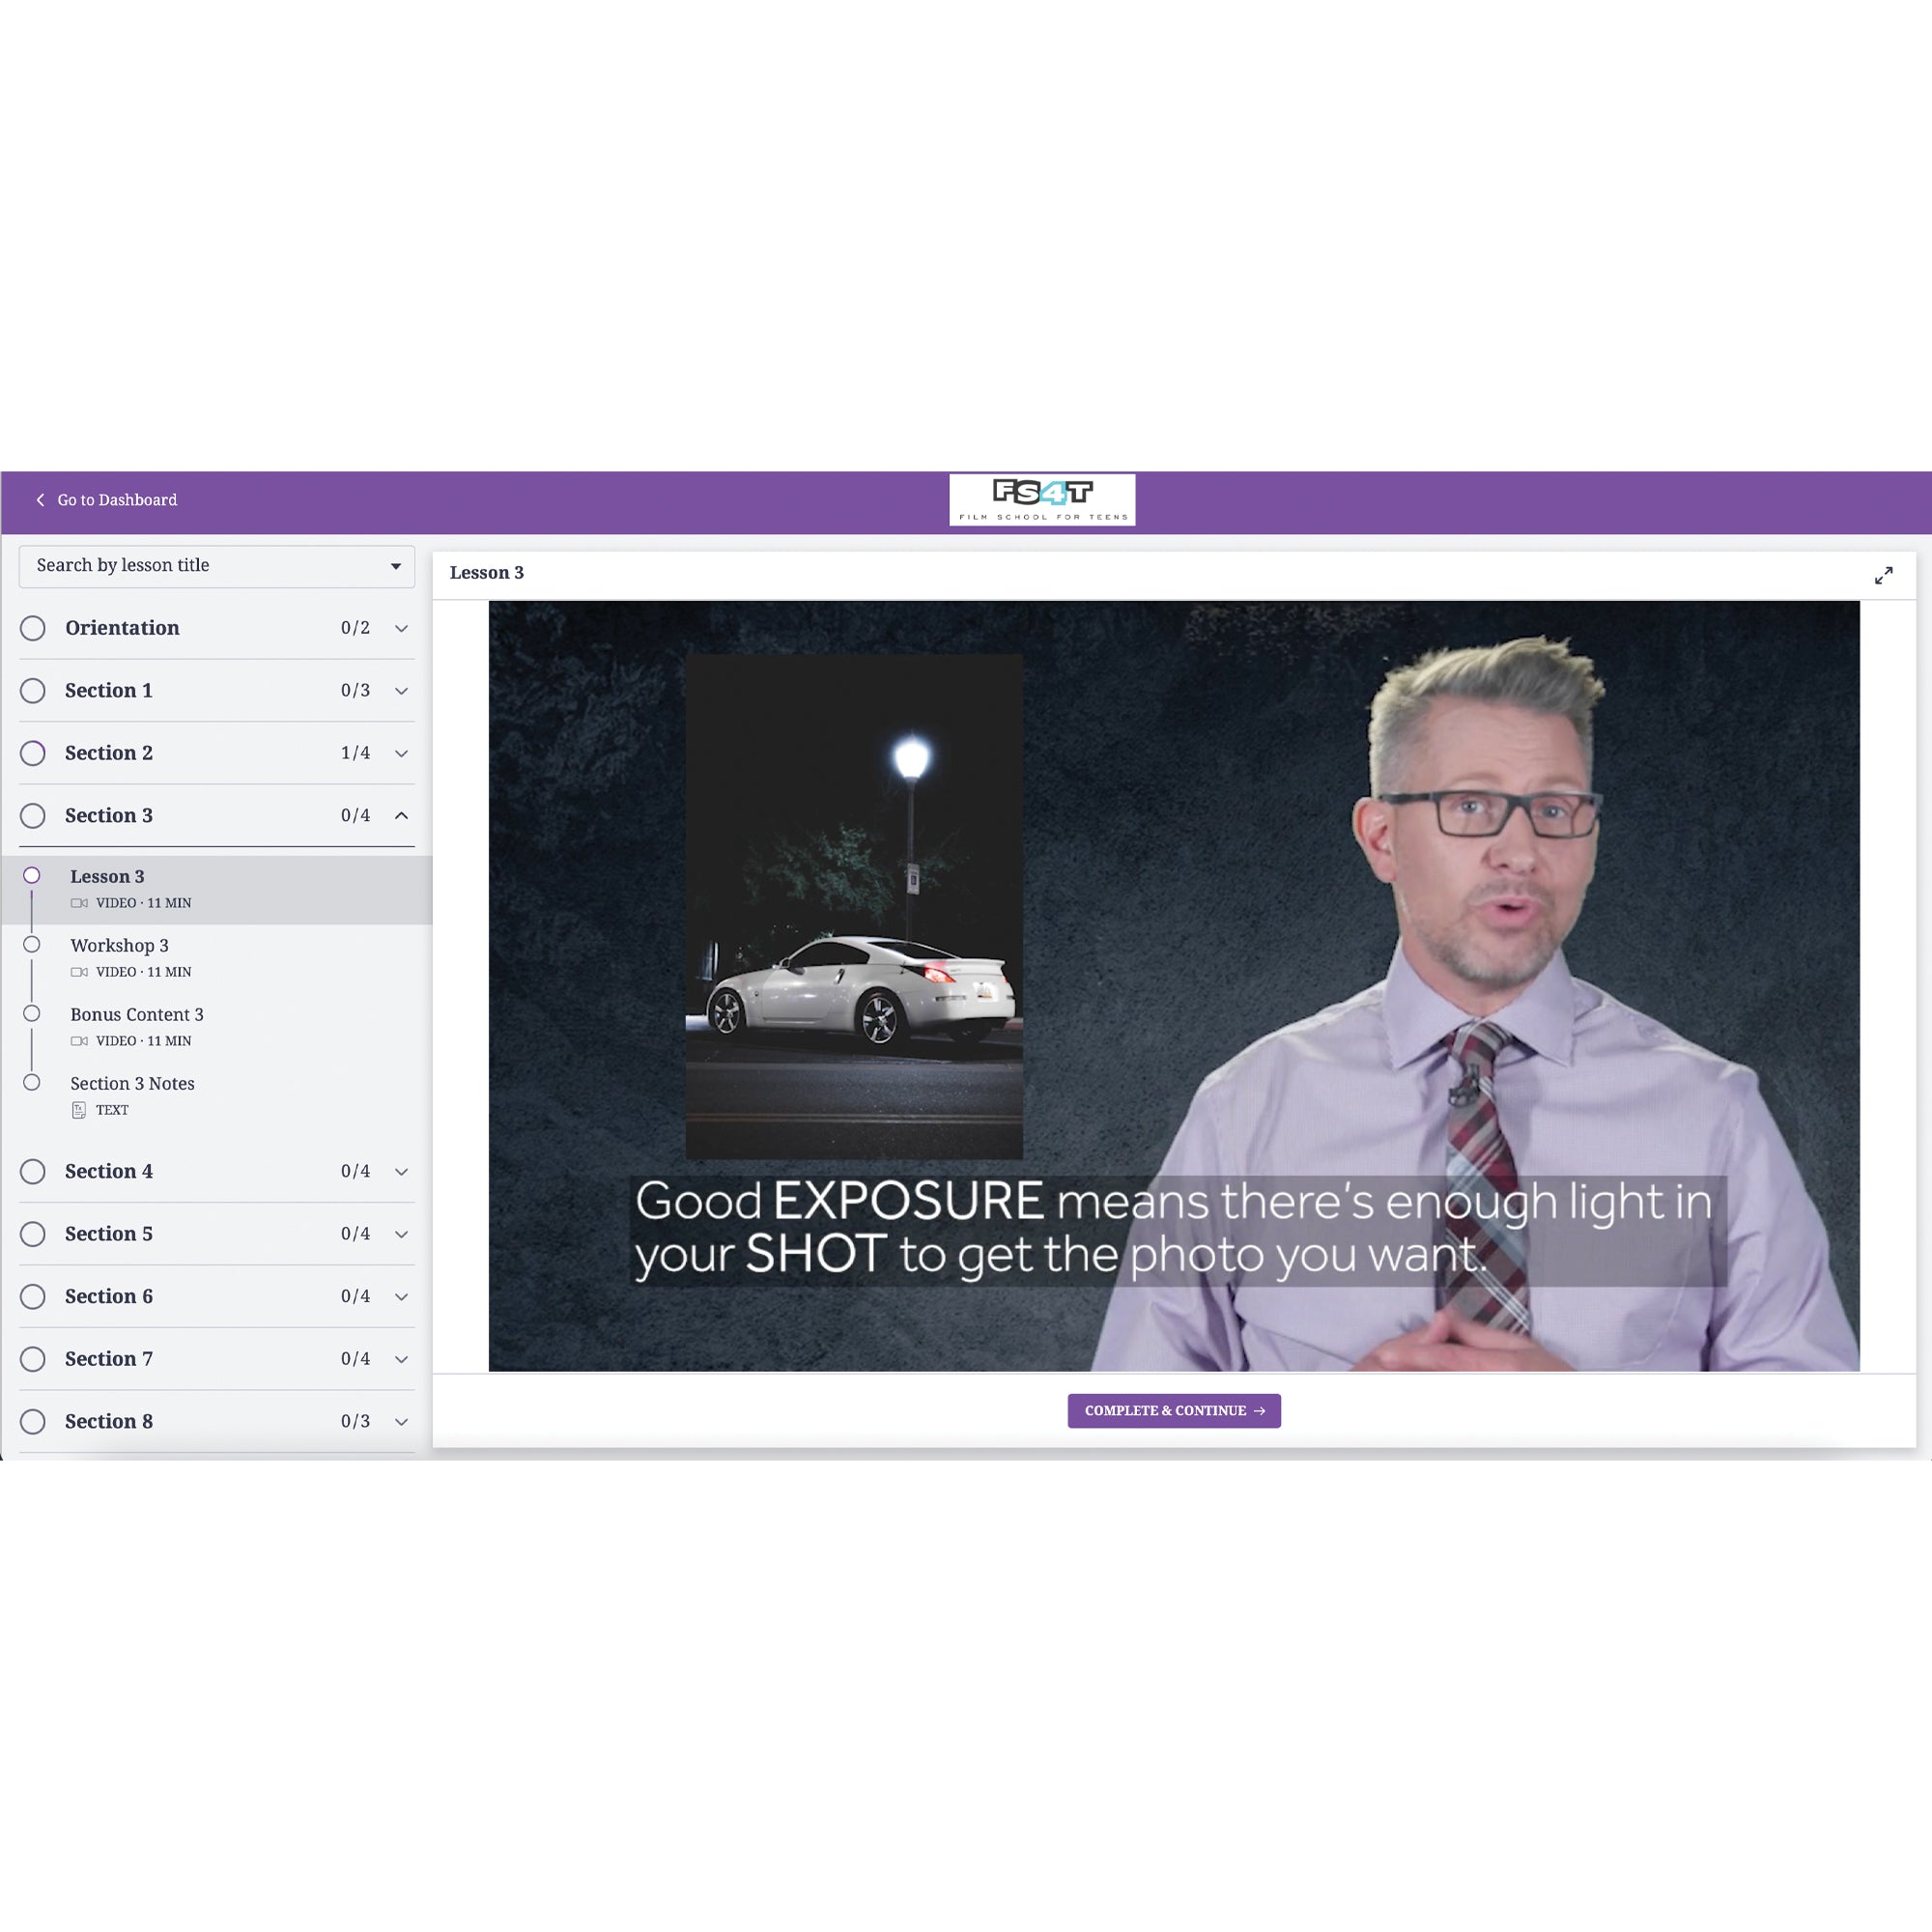 A screenshot from the Photography 4 Teens program. There is a menu on the left and the background is a white with a bright purple boarder at the top and a button at the bottom. The middle of the screen shows a screenshot of a gray-haired man with glasses and a necktie in the middle of talking. To the upper-left of him is a picture of a white car in the night parked under a street lamp. The words across the screen reads “Good EXPOSURE means there’s enough light in your SHOT to get the photo you want.”